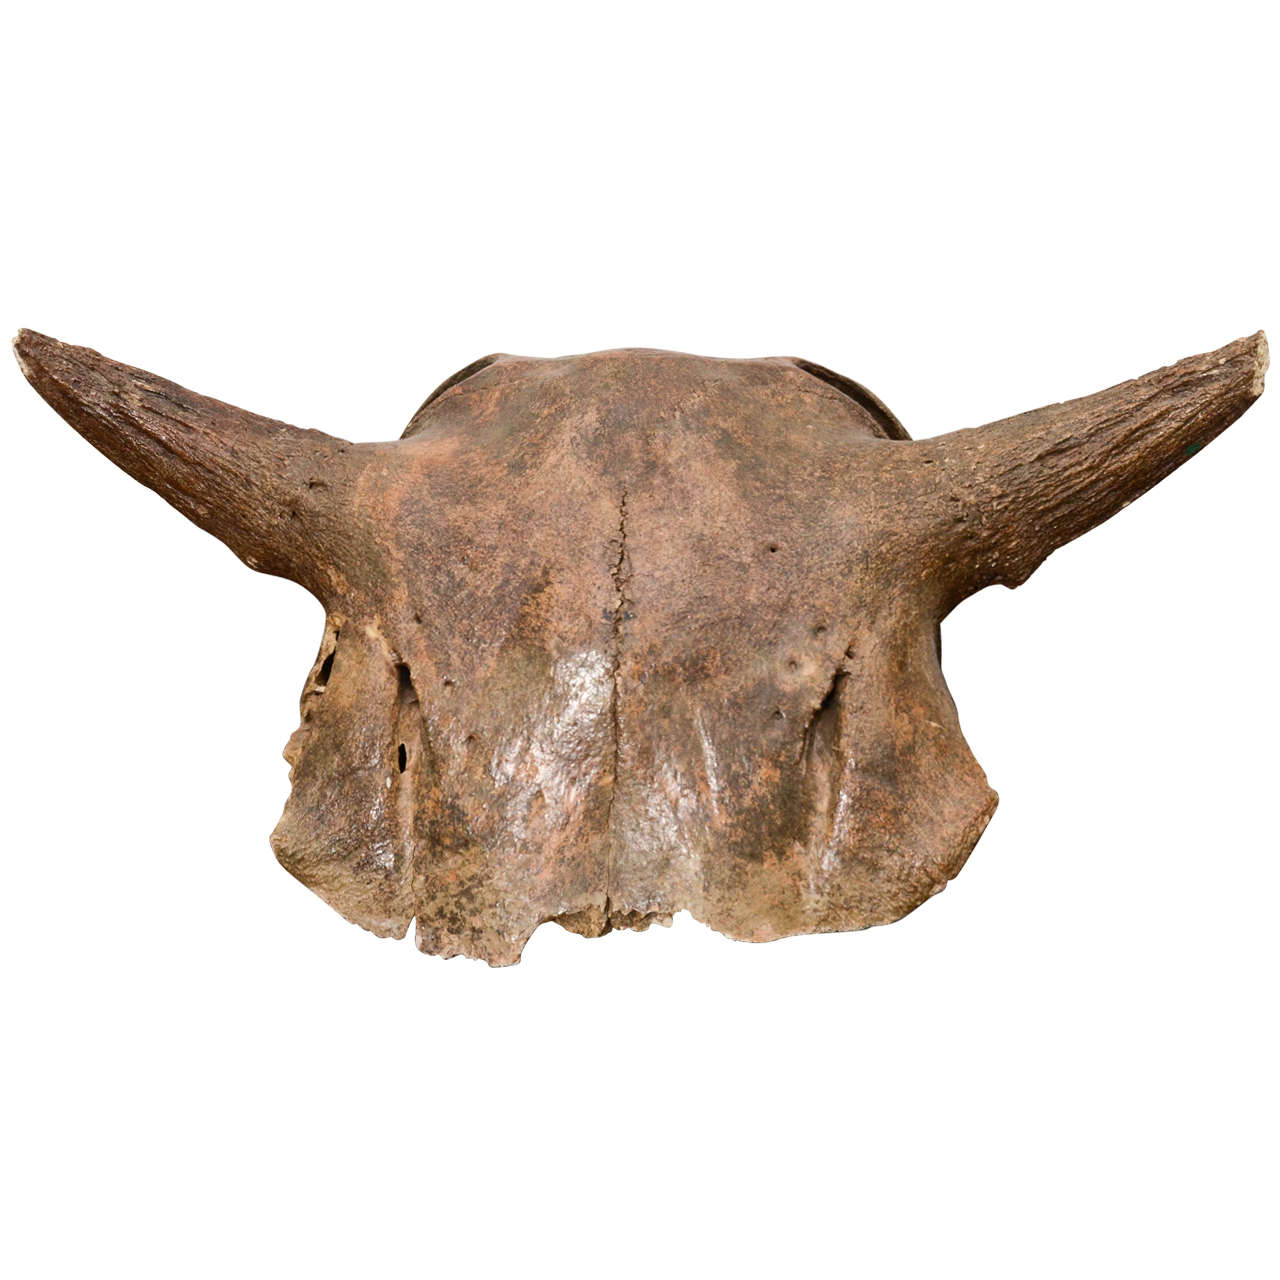 Aged and Patinated Cow Skull